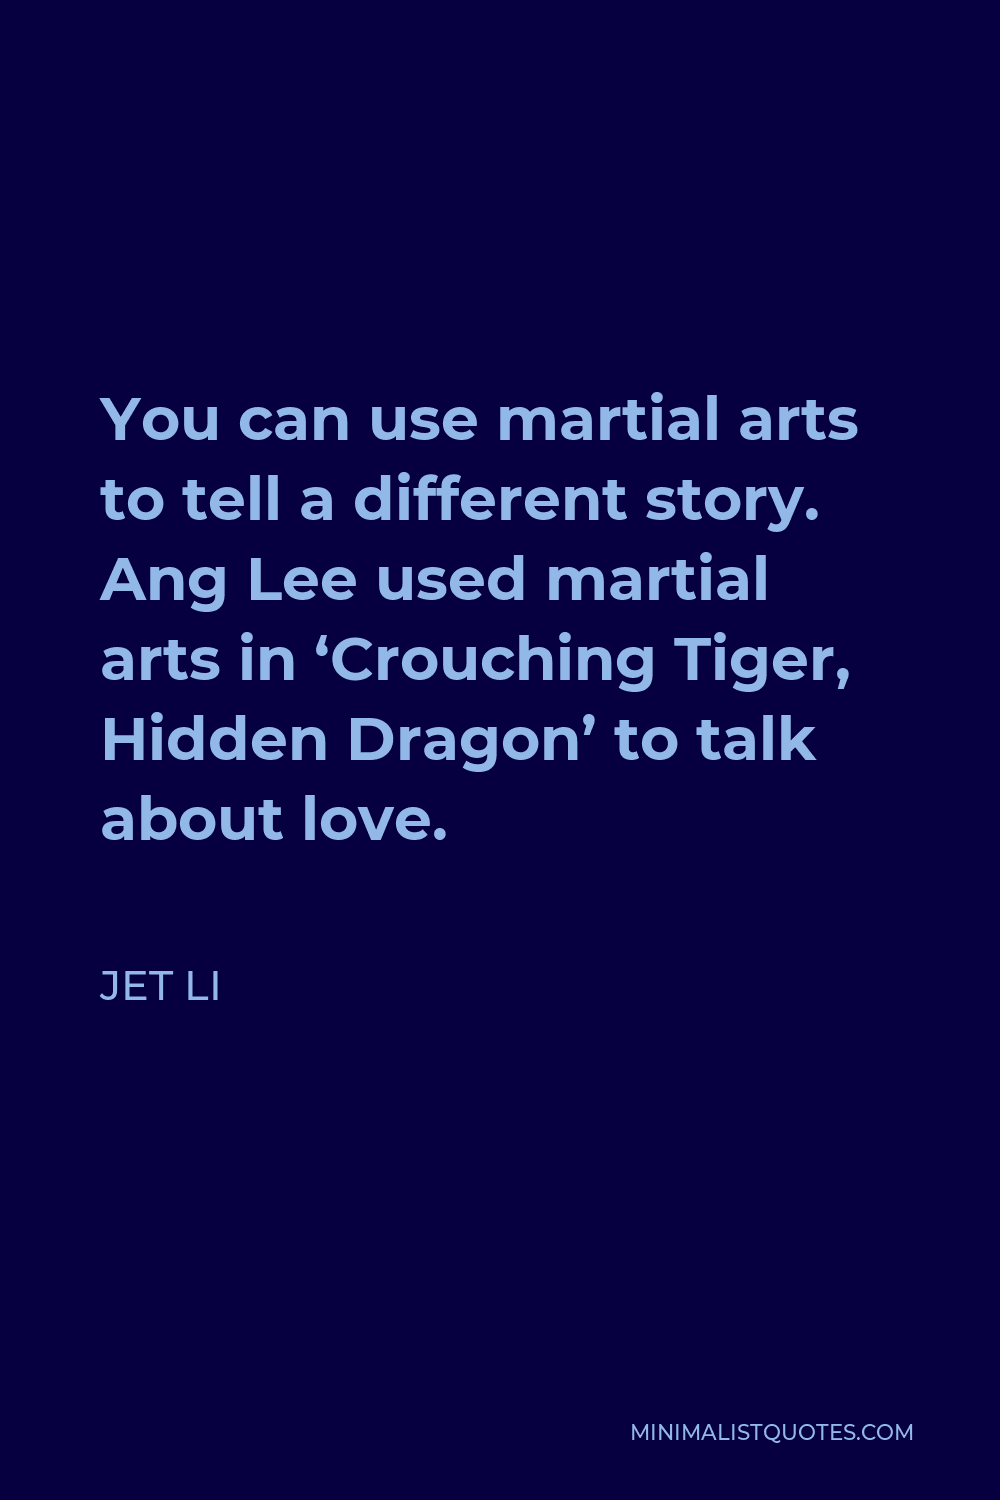 Jet Li Quote - You can use martial arts to tell a different story. Ang Lee used martial arts in ‘Crouching Tiger, Hidden Dragon’ to talk about love.